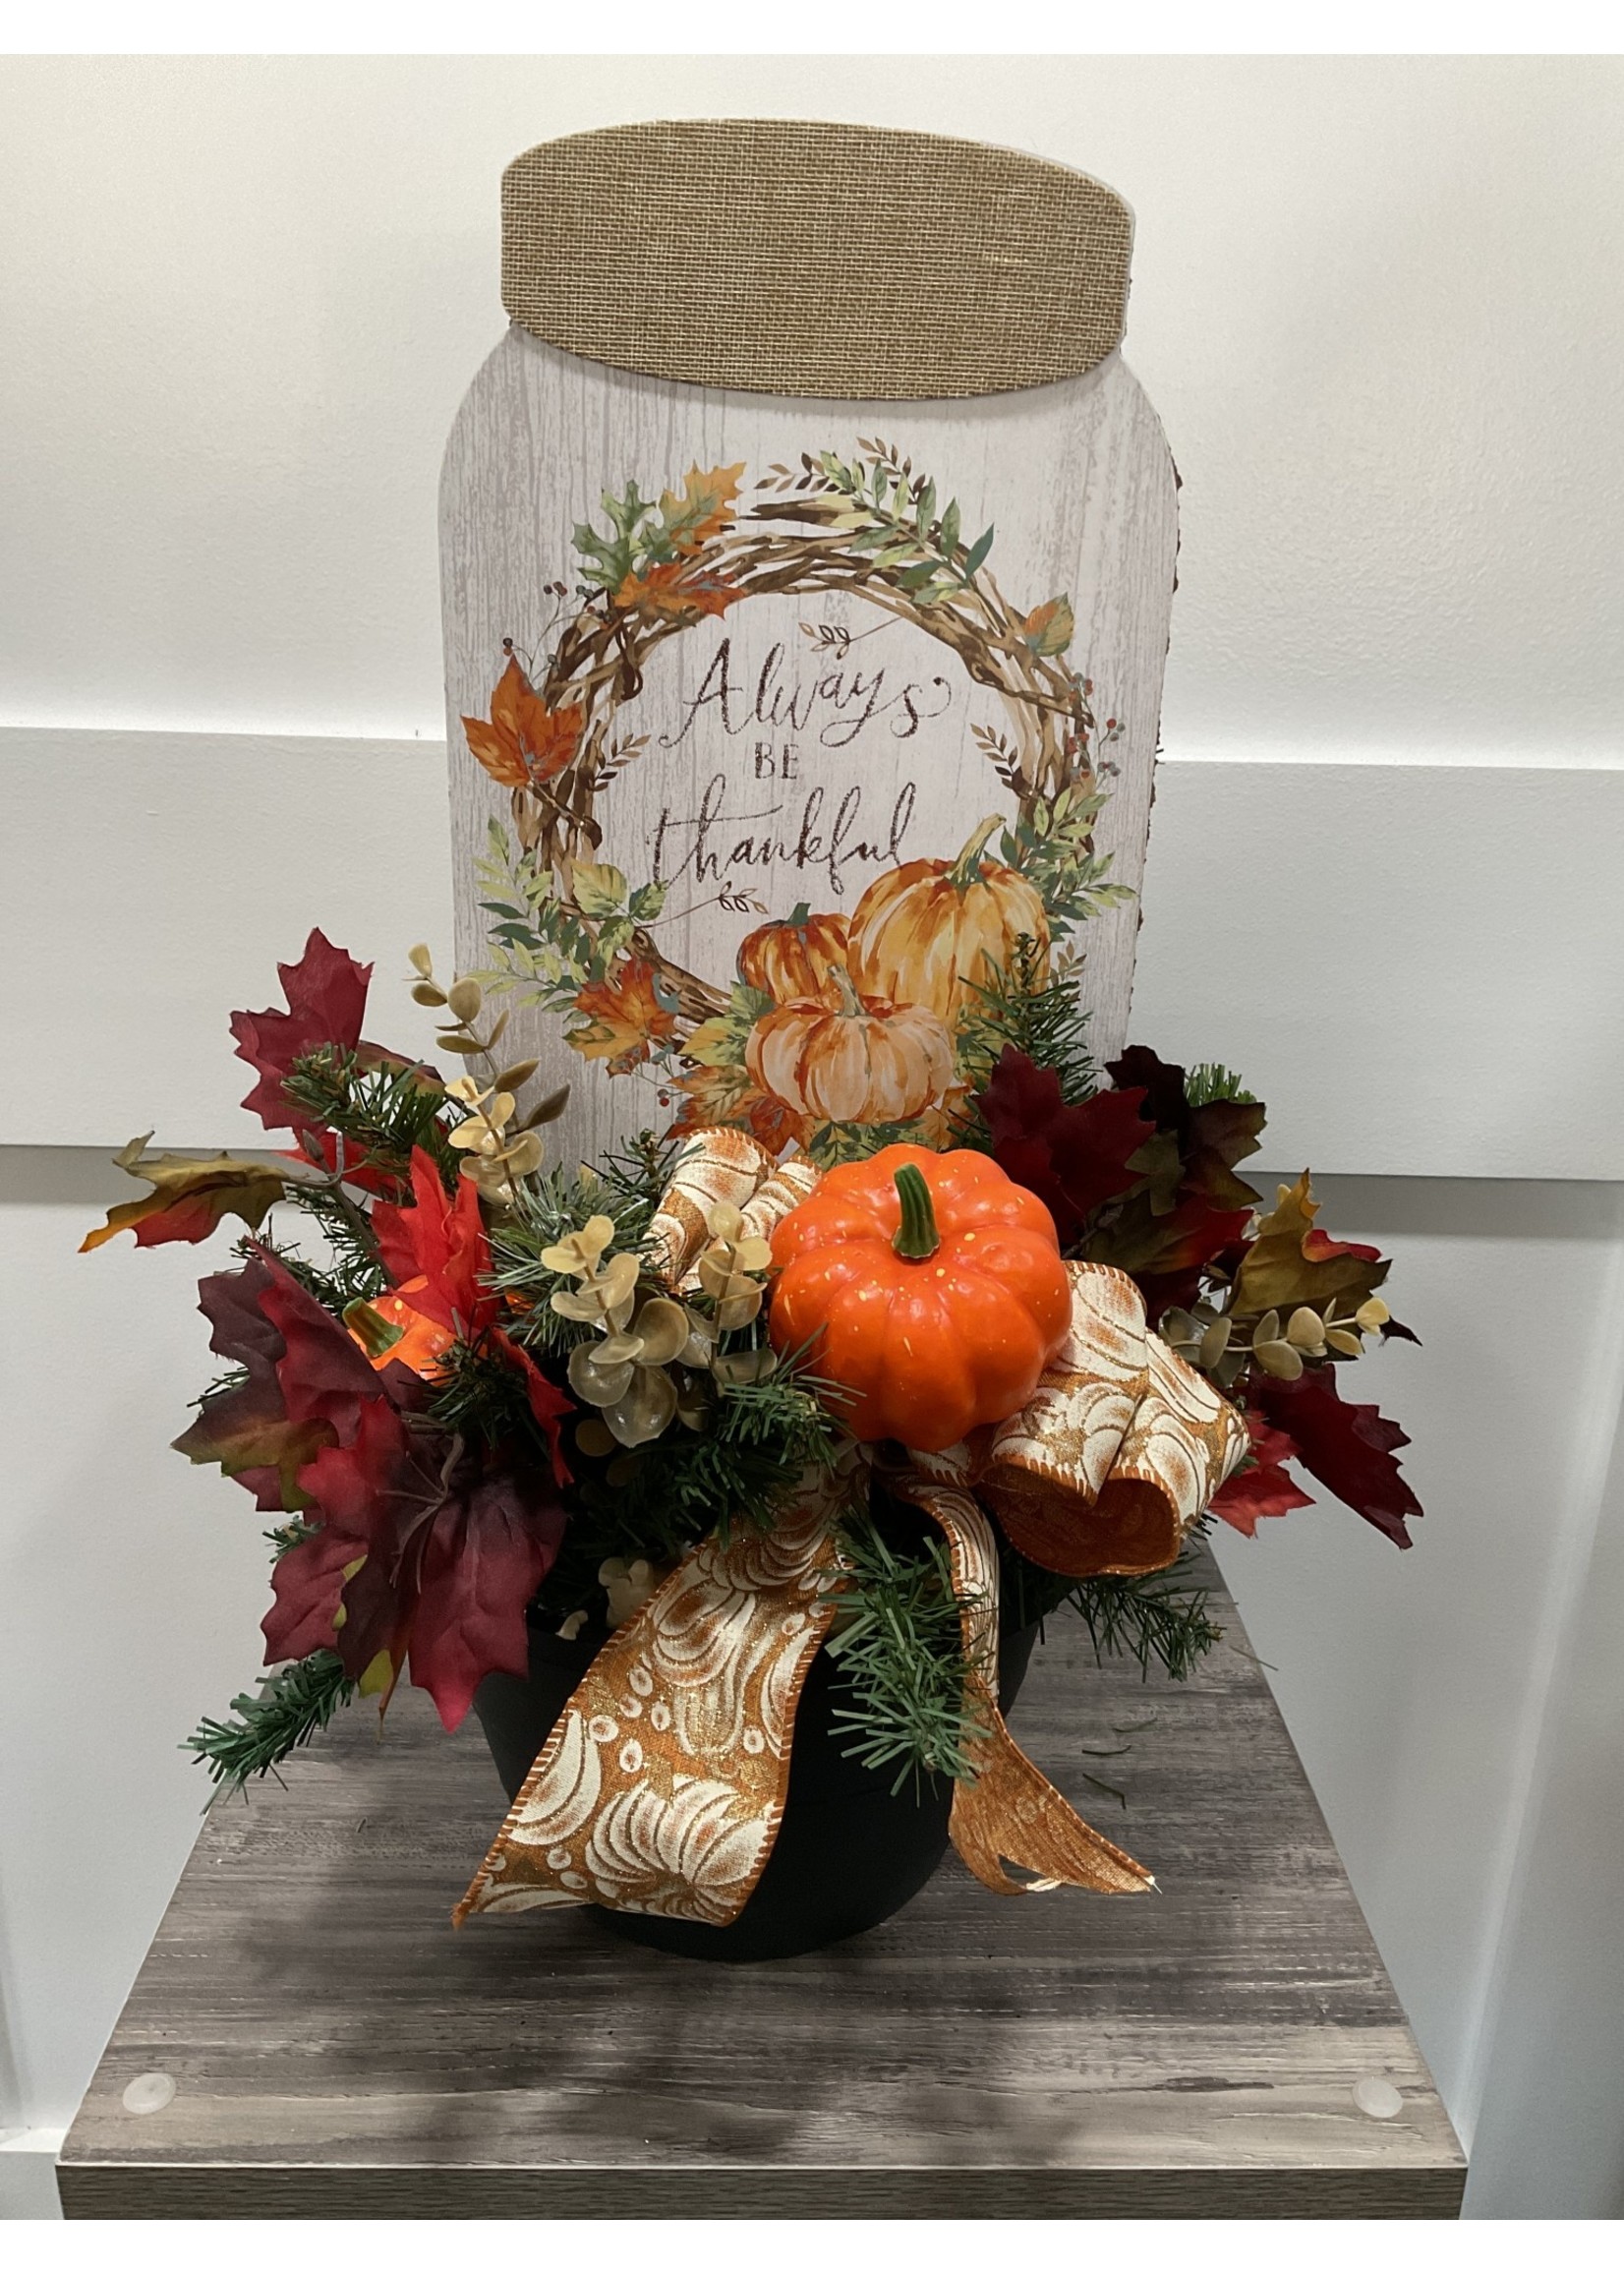 My New Favorite Thing Centerpiece 18x19x21-Black Container w/Jar "Always Be Thankful" Pumpkins and Gold Pumpkin Ribbon